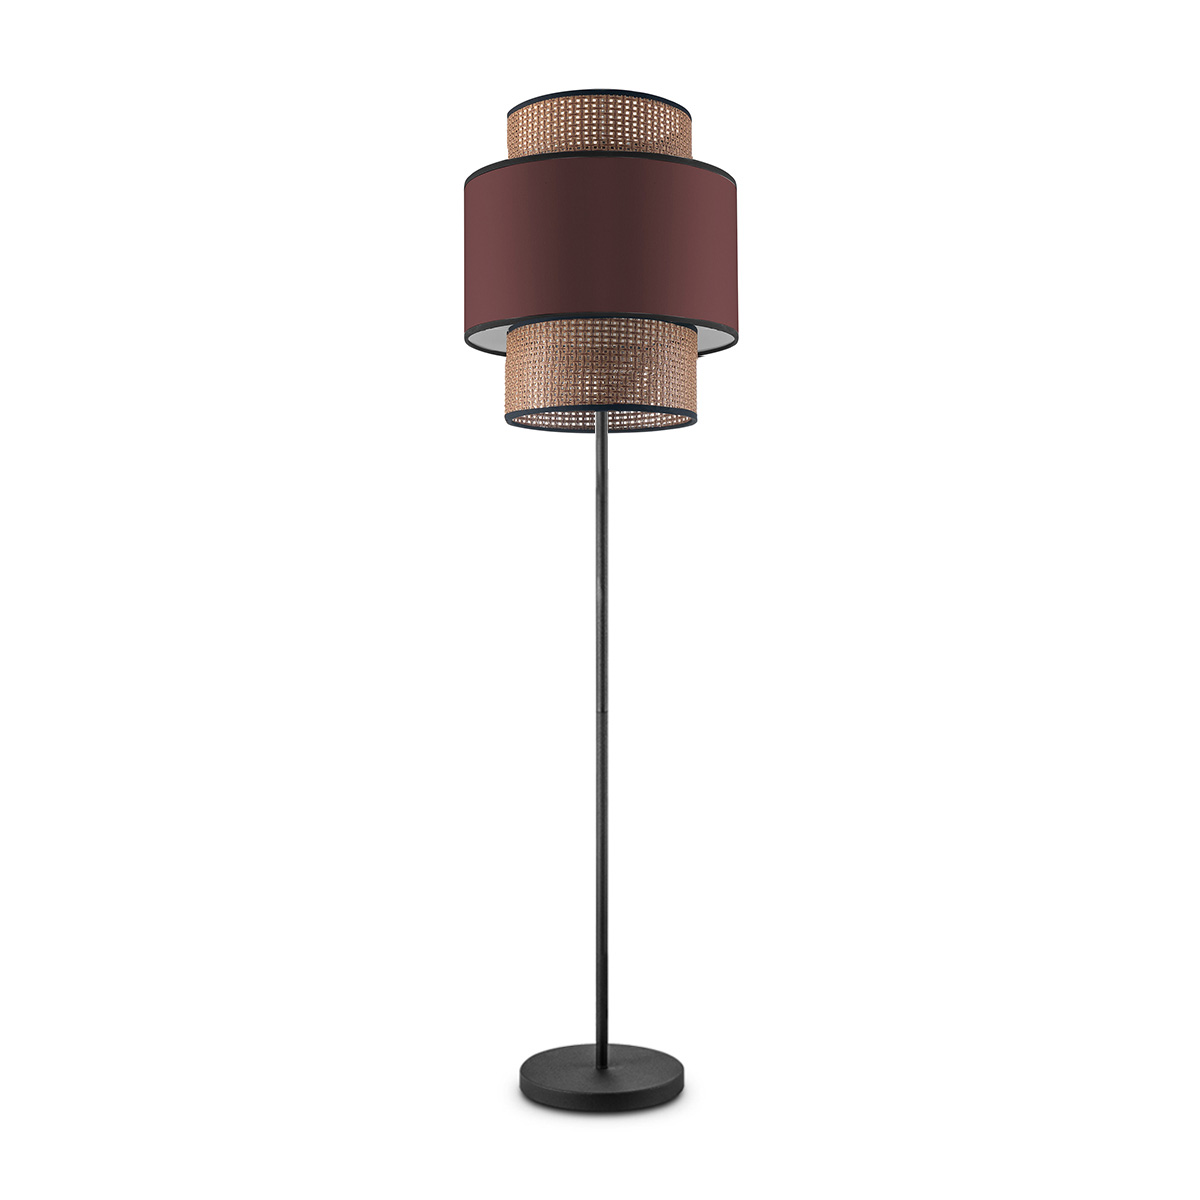 Tangla lighting - TLF7014-30RD - LED floor lamp 1 Light - metal and natural rattan and TC fabric in natural and red - night - E27